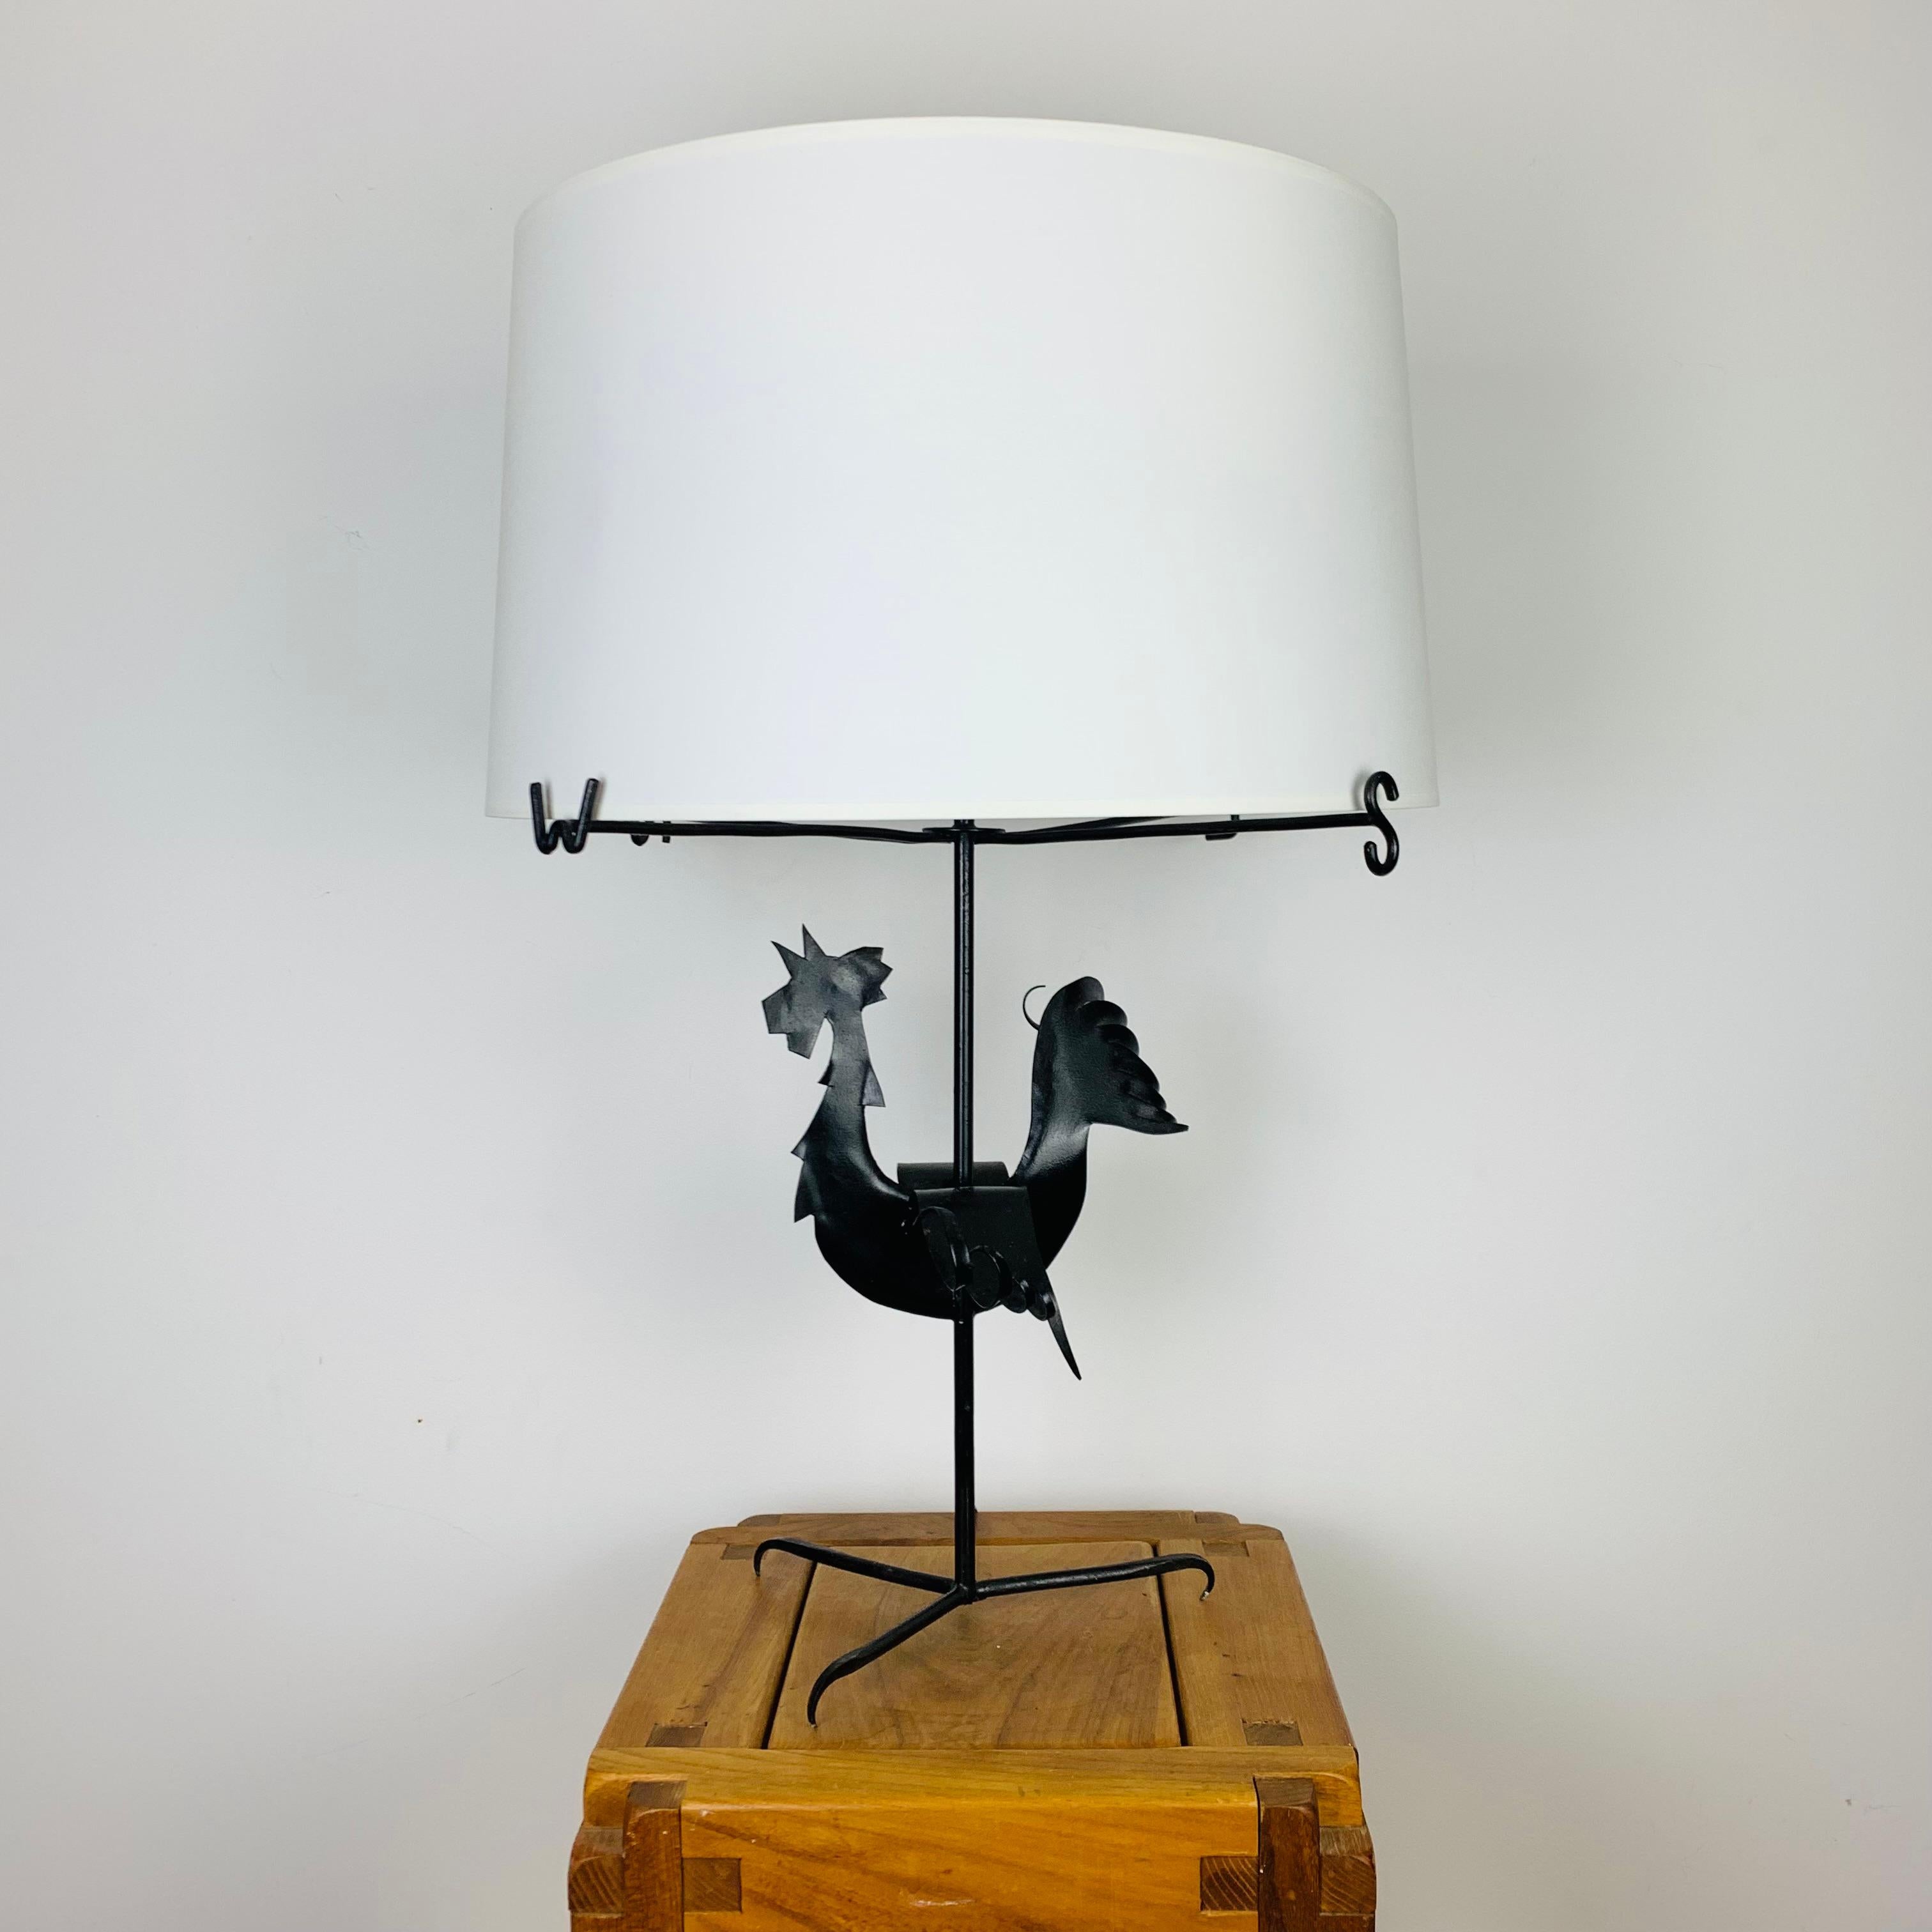 French work from the 1950's, in the manner of Jean Touret and Marolles artisans. The iron has patina.

Original french old electrification, new lampshade. 